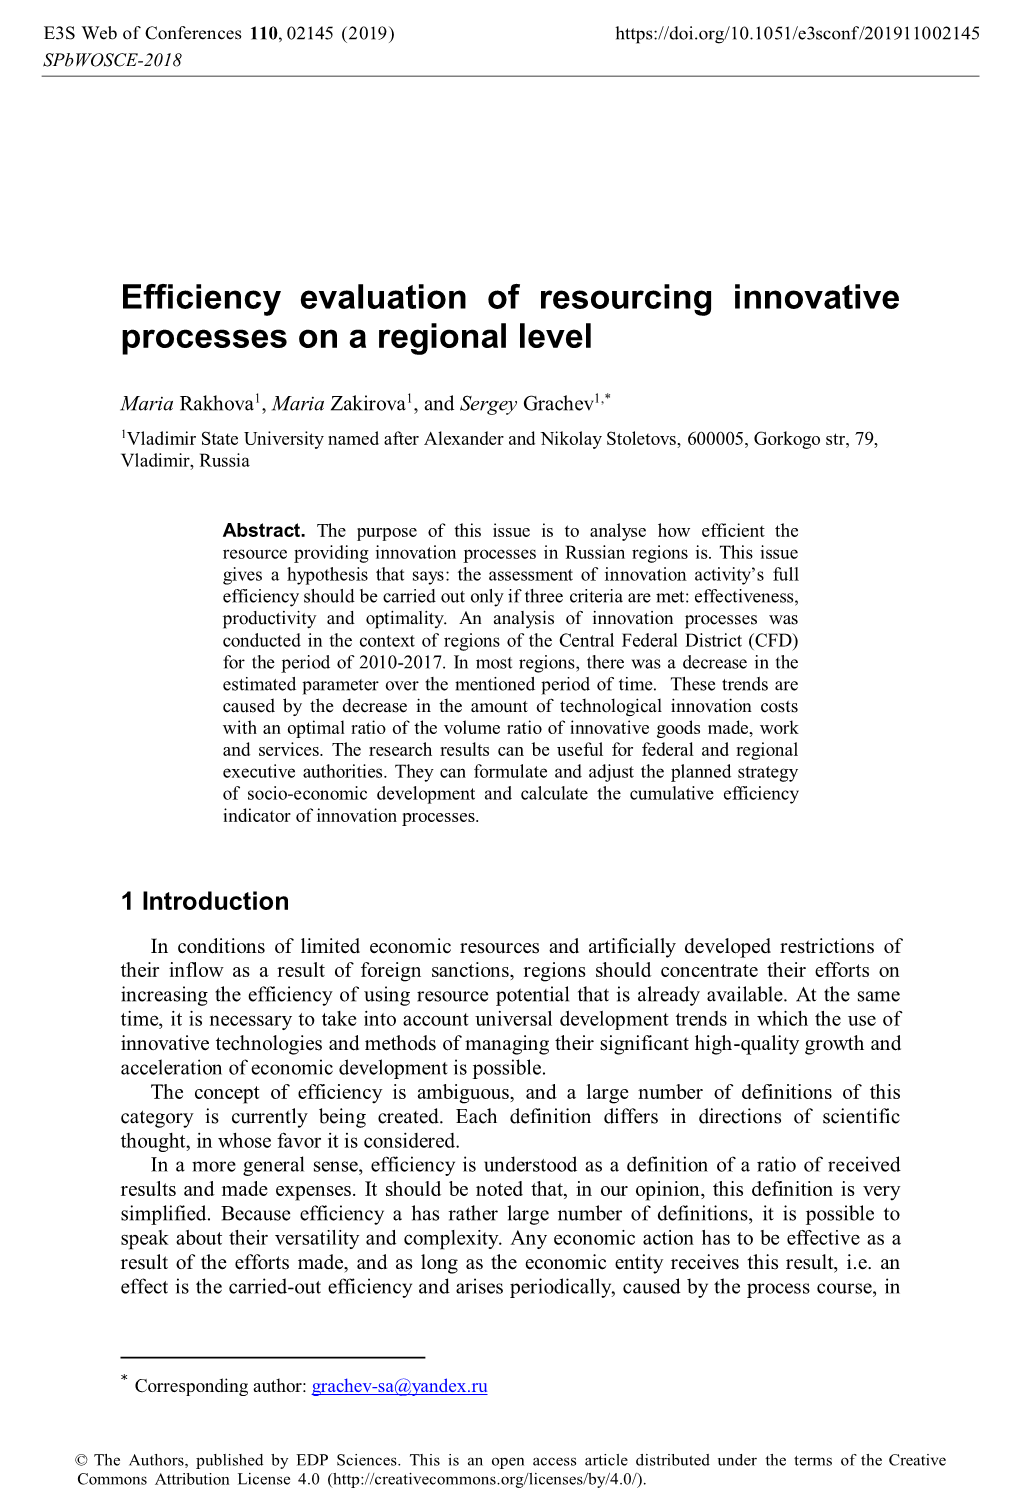 Efficiency Evaluation of Resourcing Innovative Processes on a Regional Level